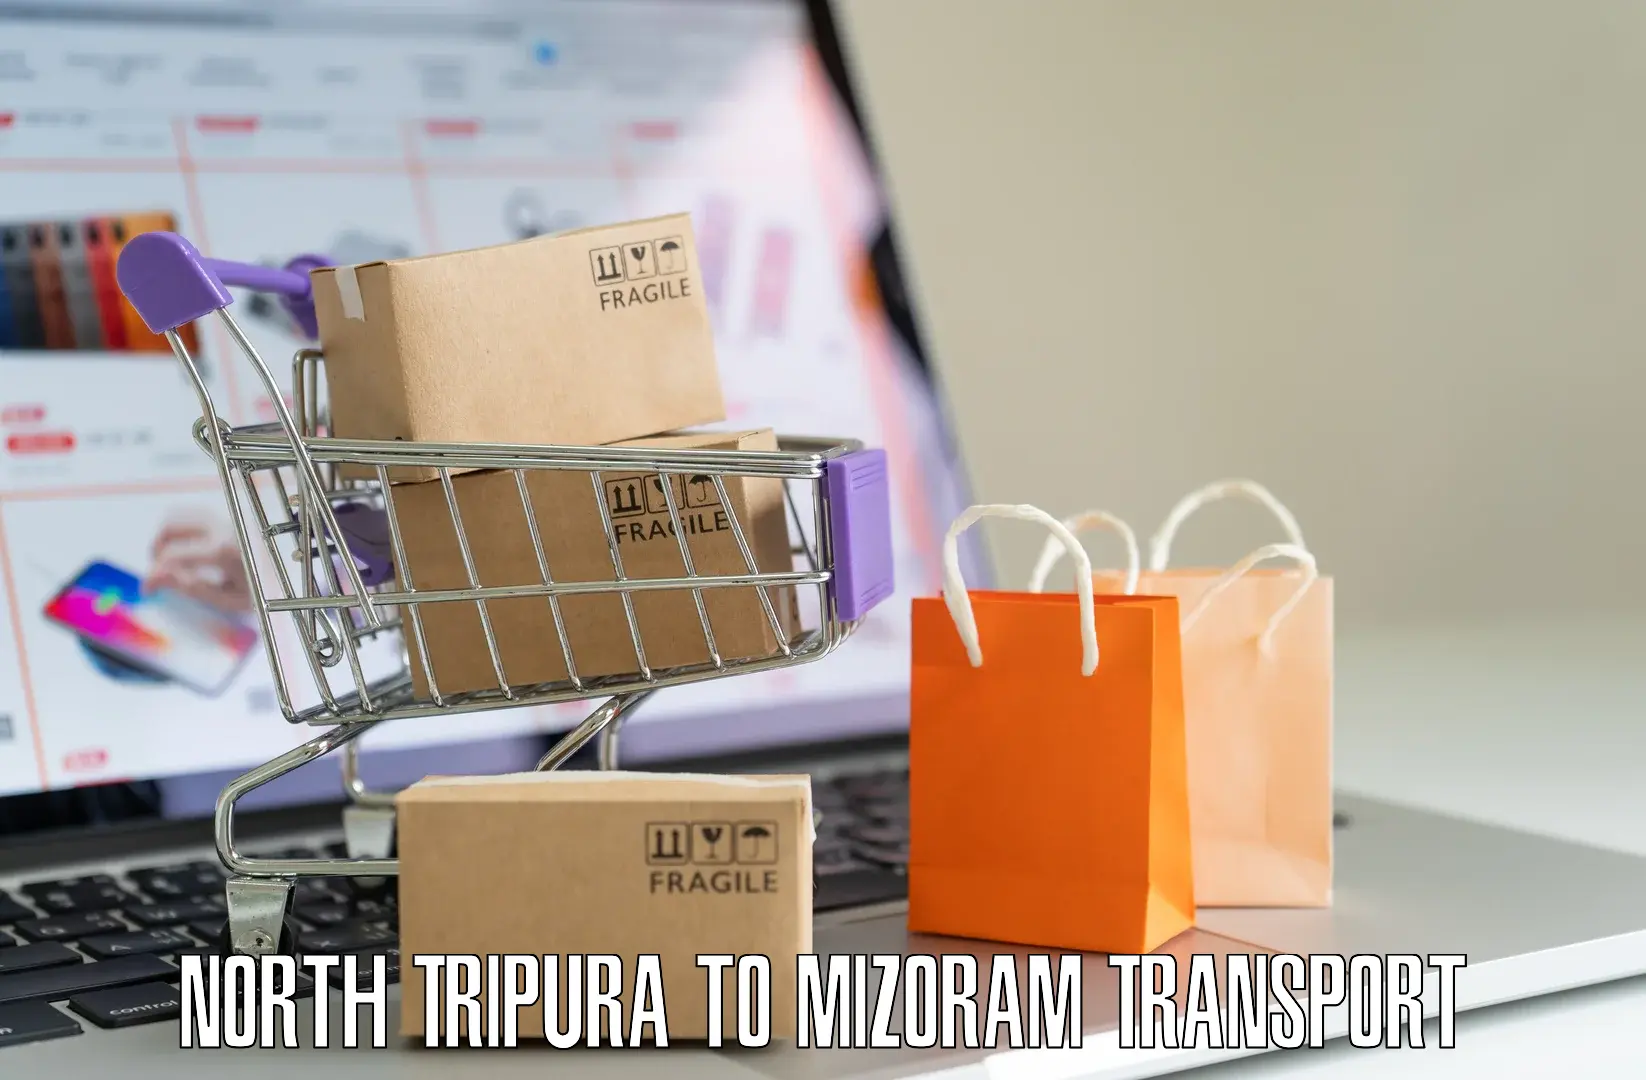 Daily transport service North Tripura to Darlawn